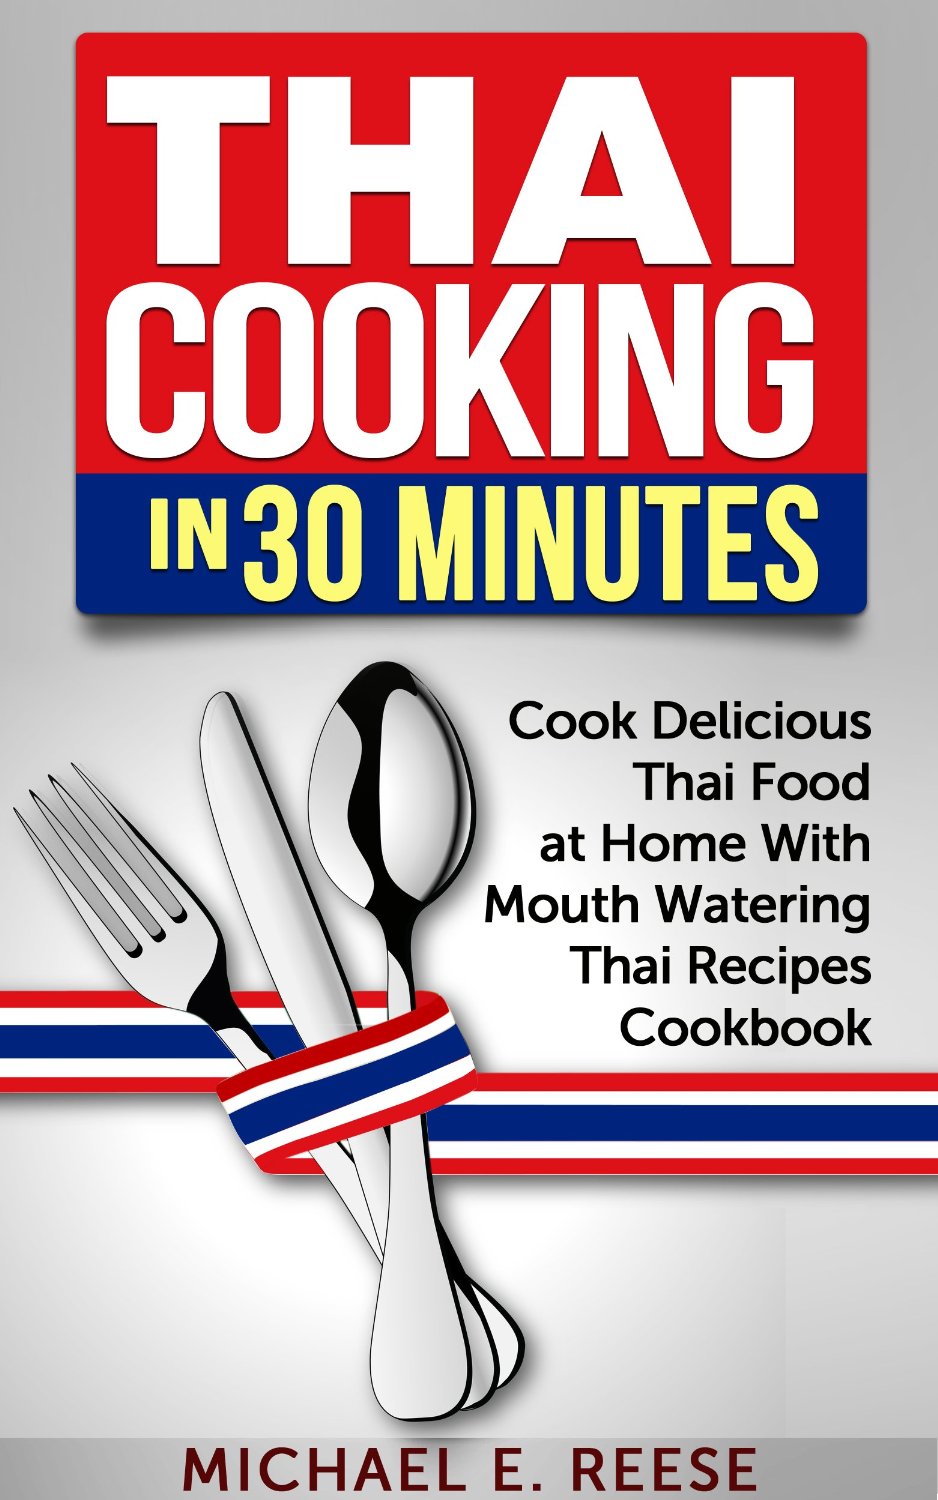 Thai Cooking in 30 Minutes: Cook Delicious Thai Food at Home With Mouth Watering Thai Recipes Cookbook by Michael E. Reese